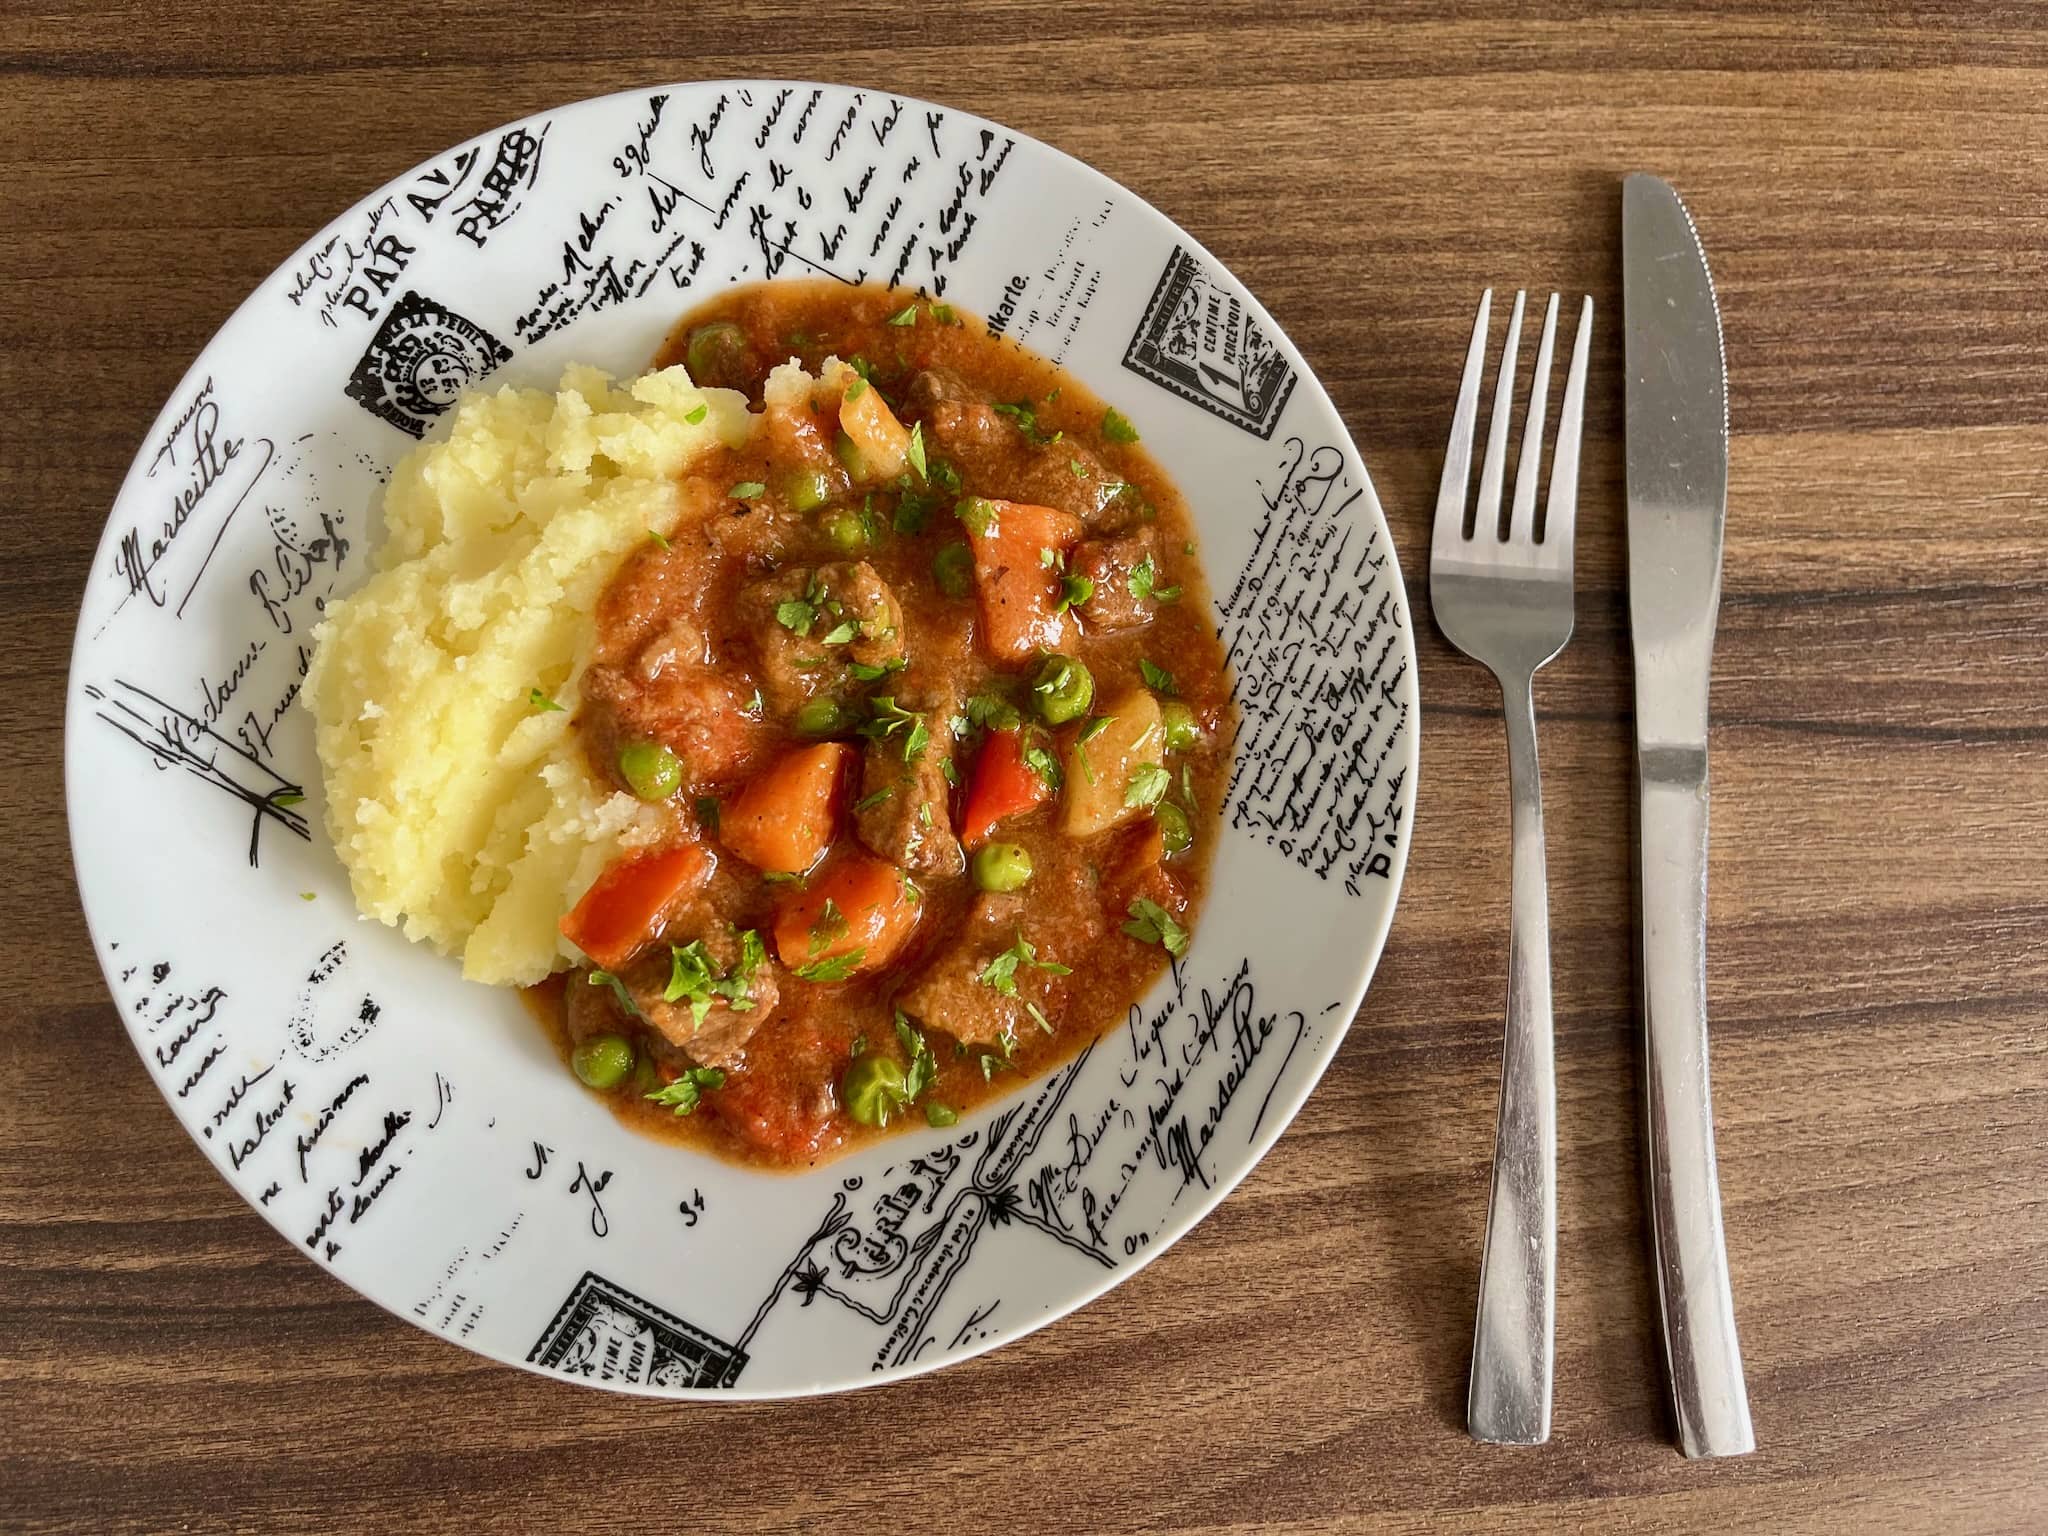 Beef Casserole served with mashed potatoes